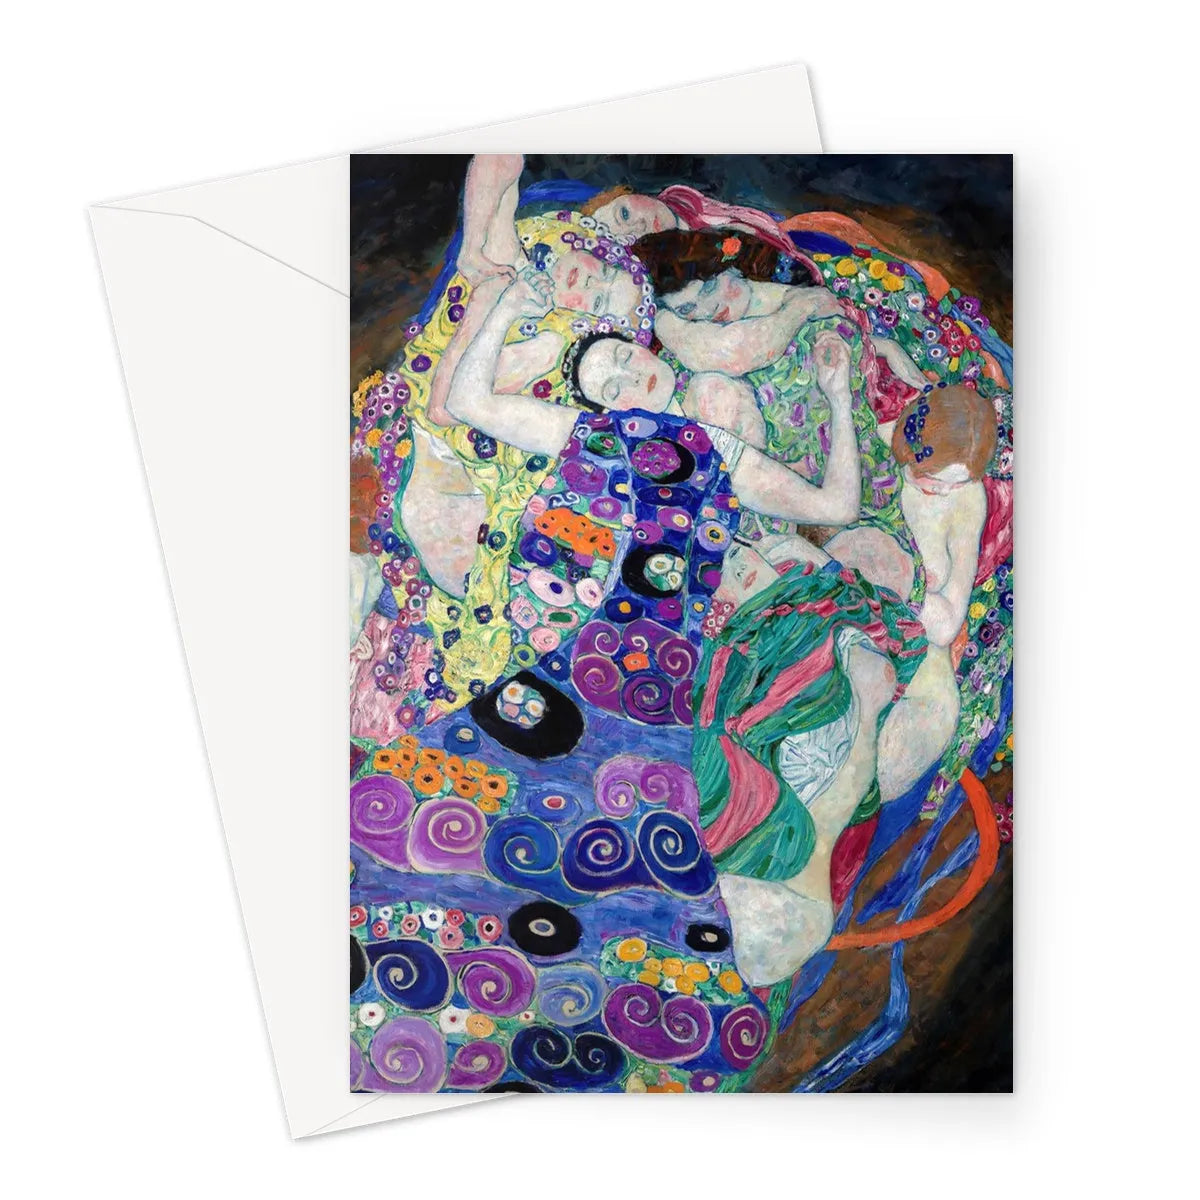 The Virgin By Gustav Klimt Greeting Card - A5 Portrait / 10 Cards - Greeting & Note Cards - Aesthetic Art